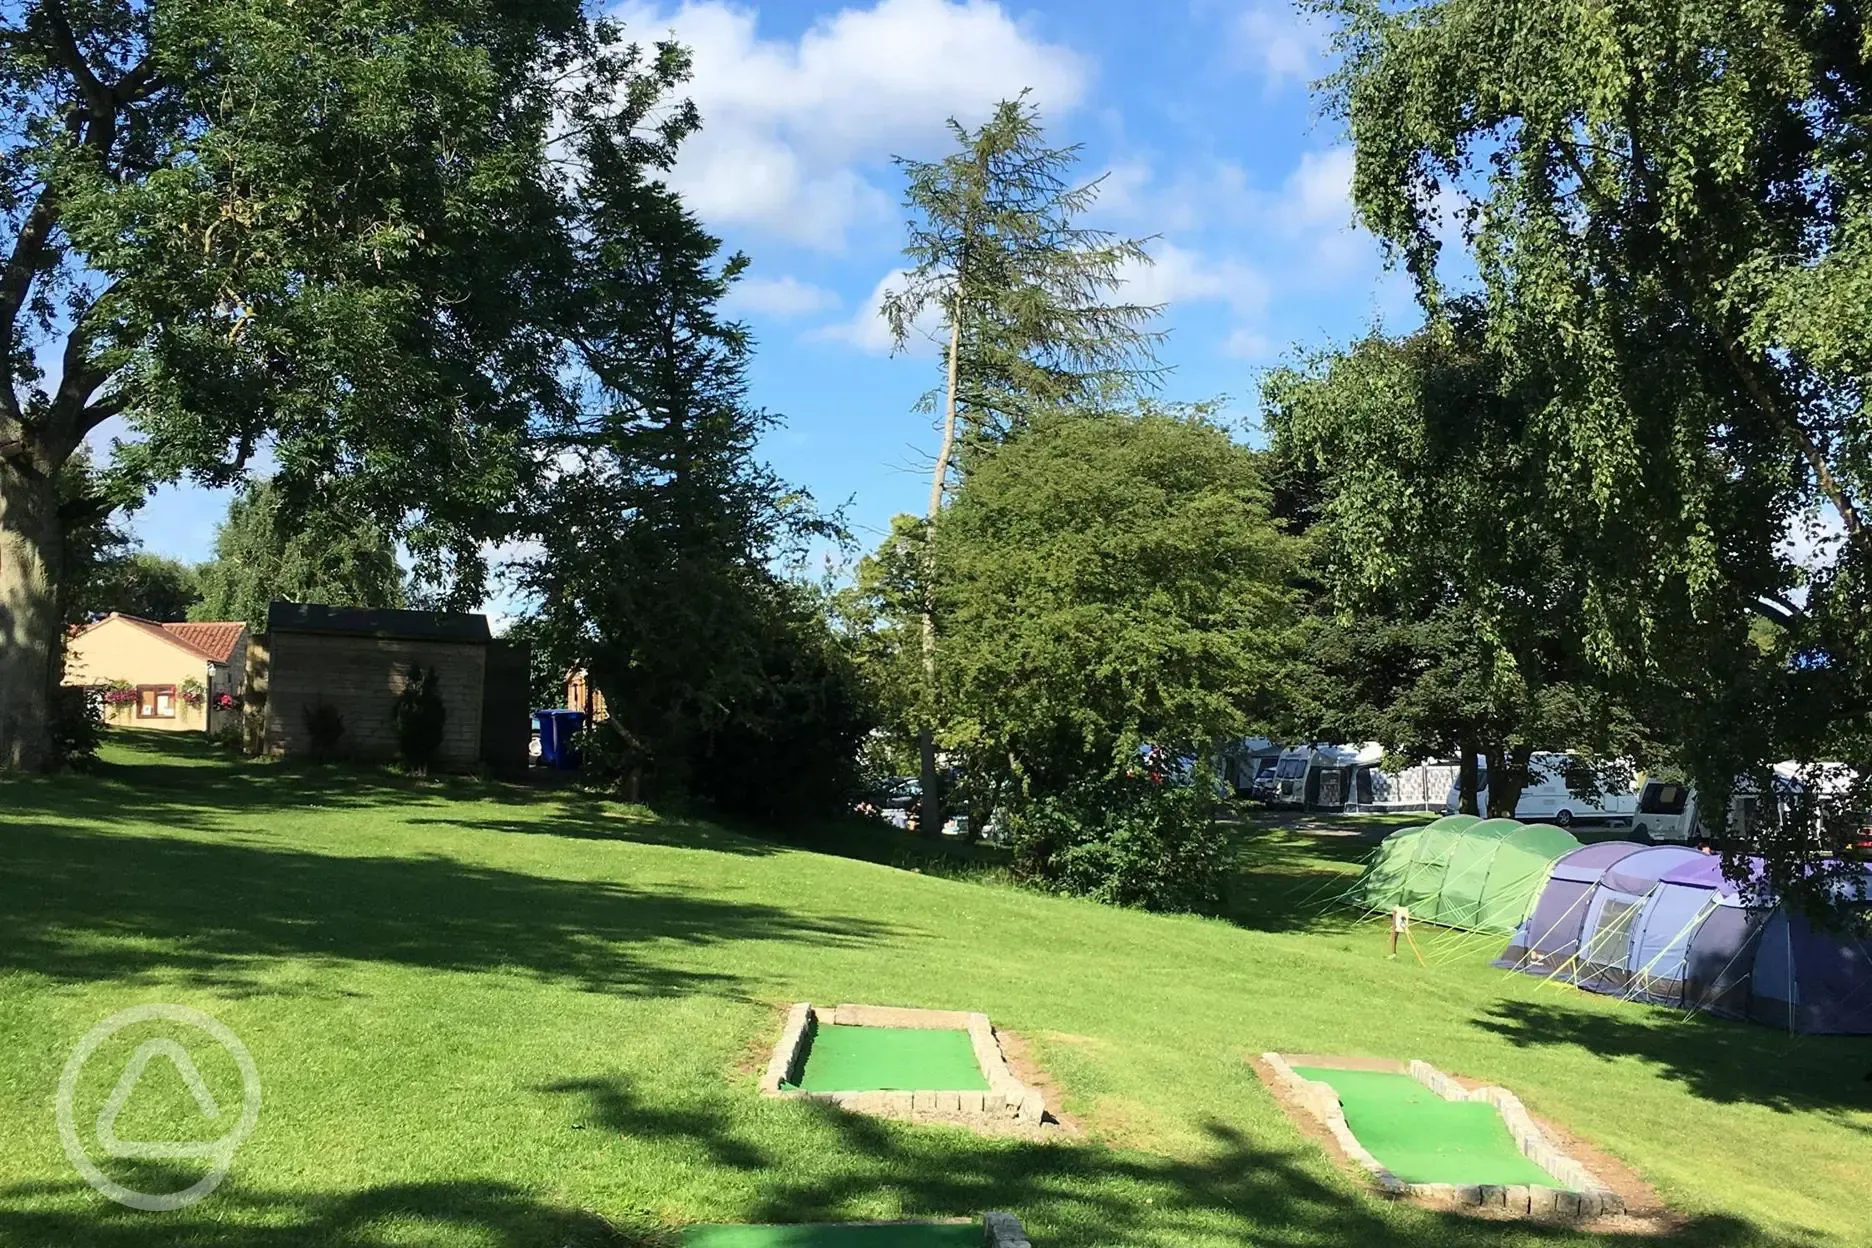 View of crazy golf